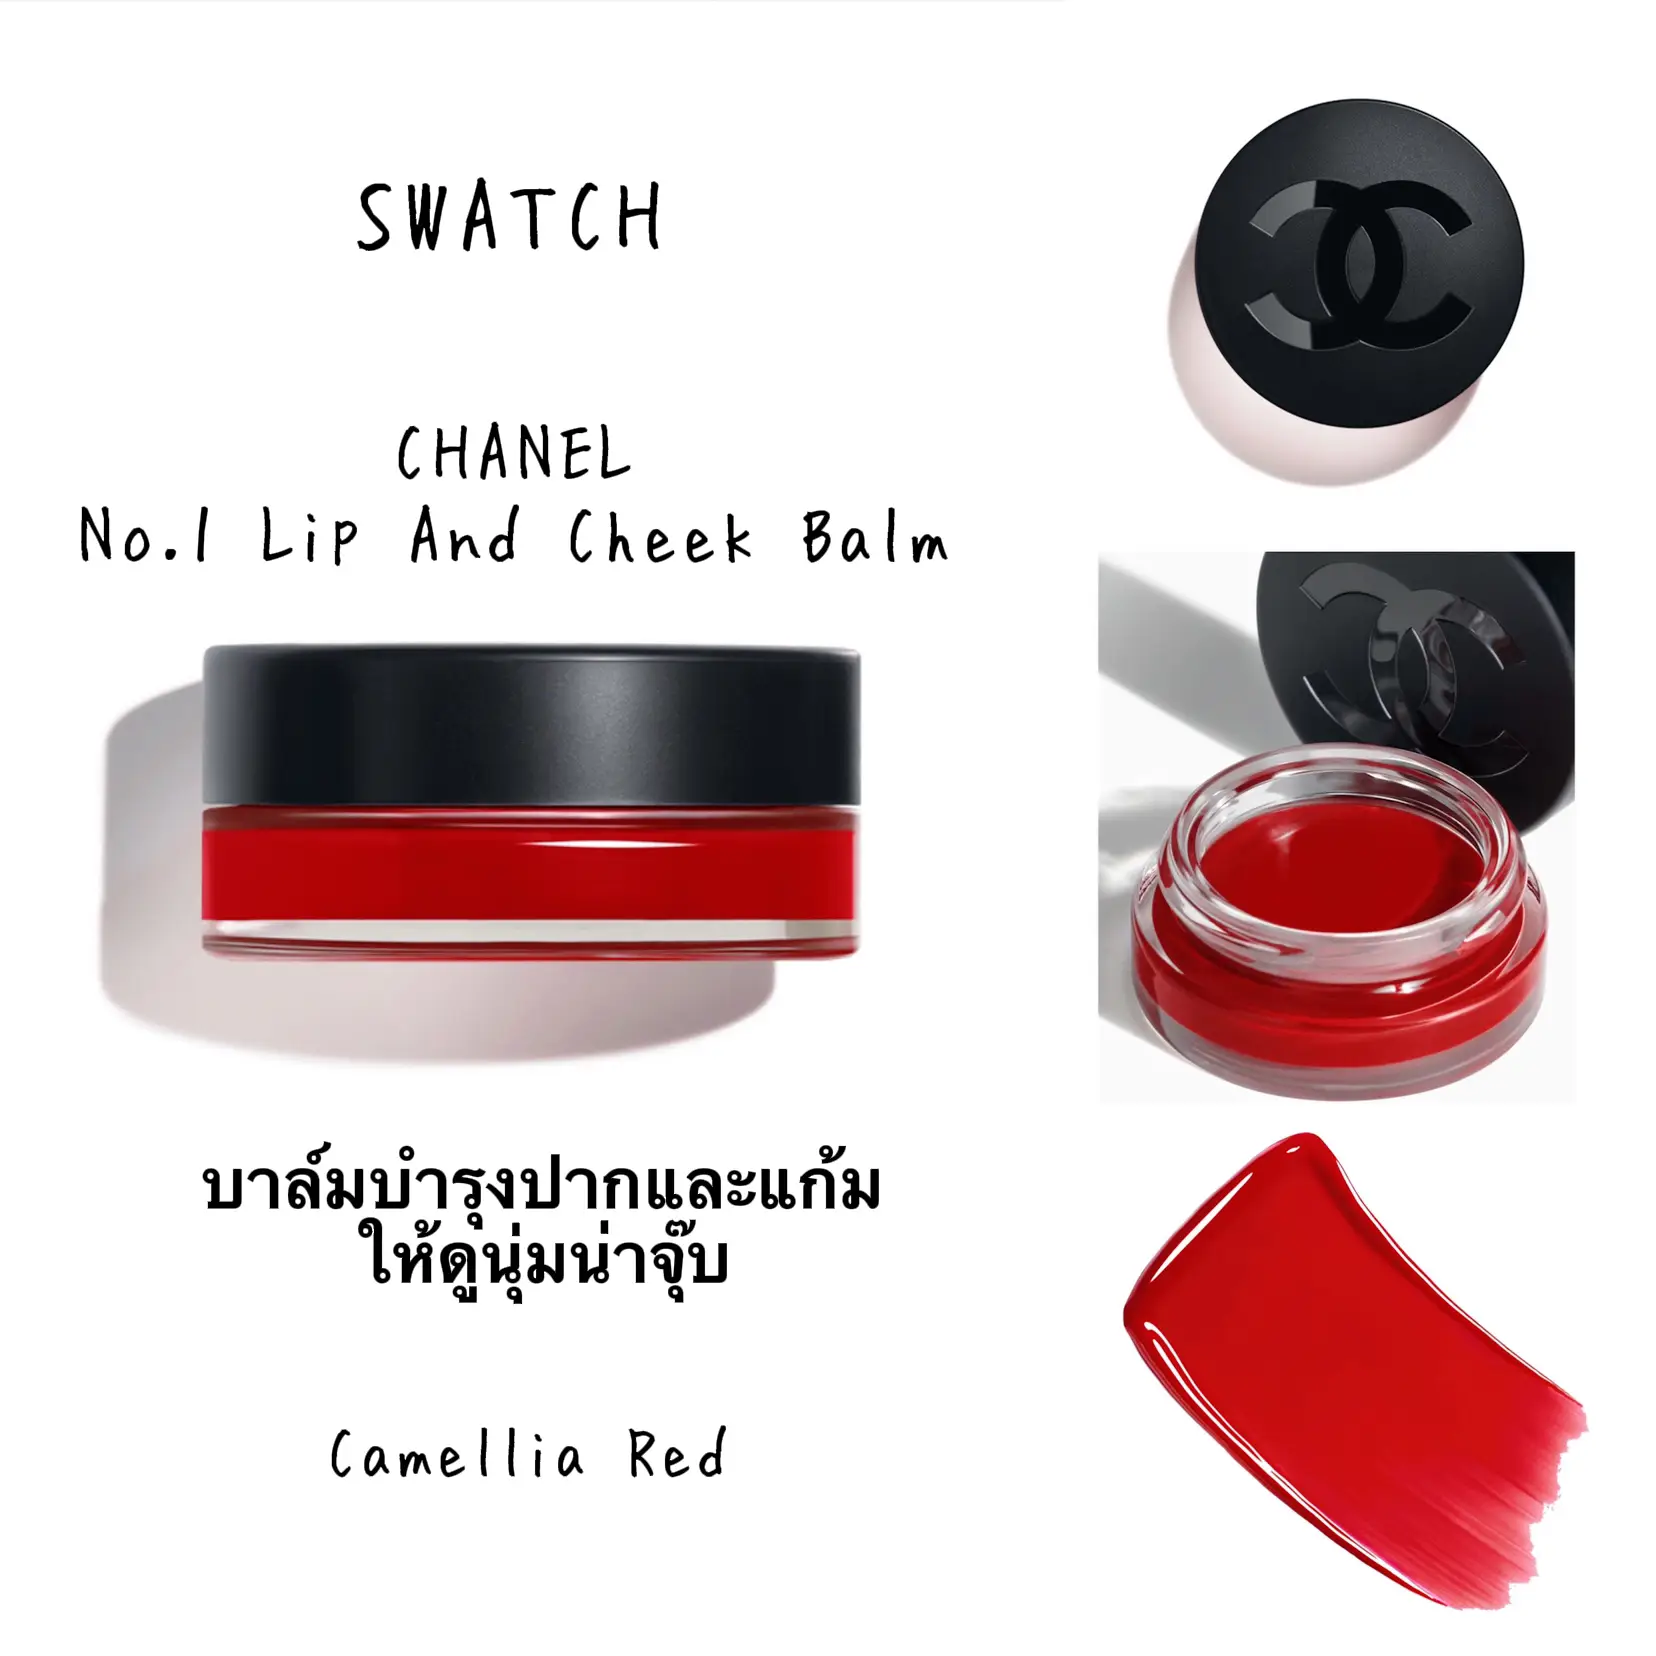 Review  Chanel N°1 DE CHANEL Red Camellia Revitalizing Lip and